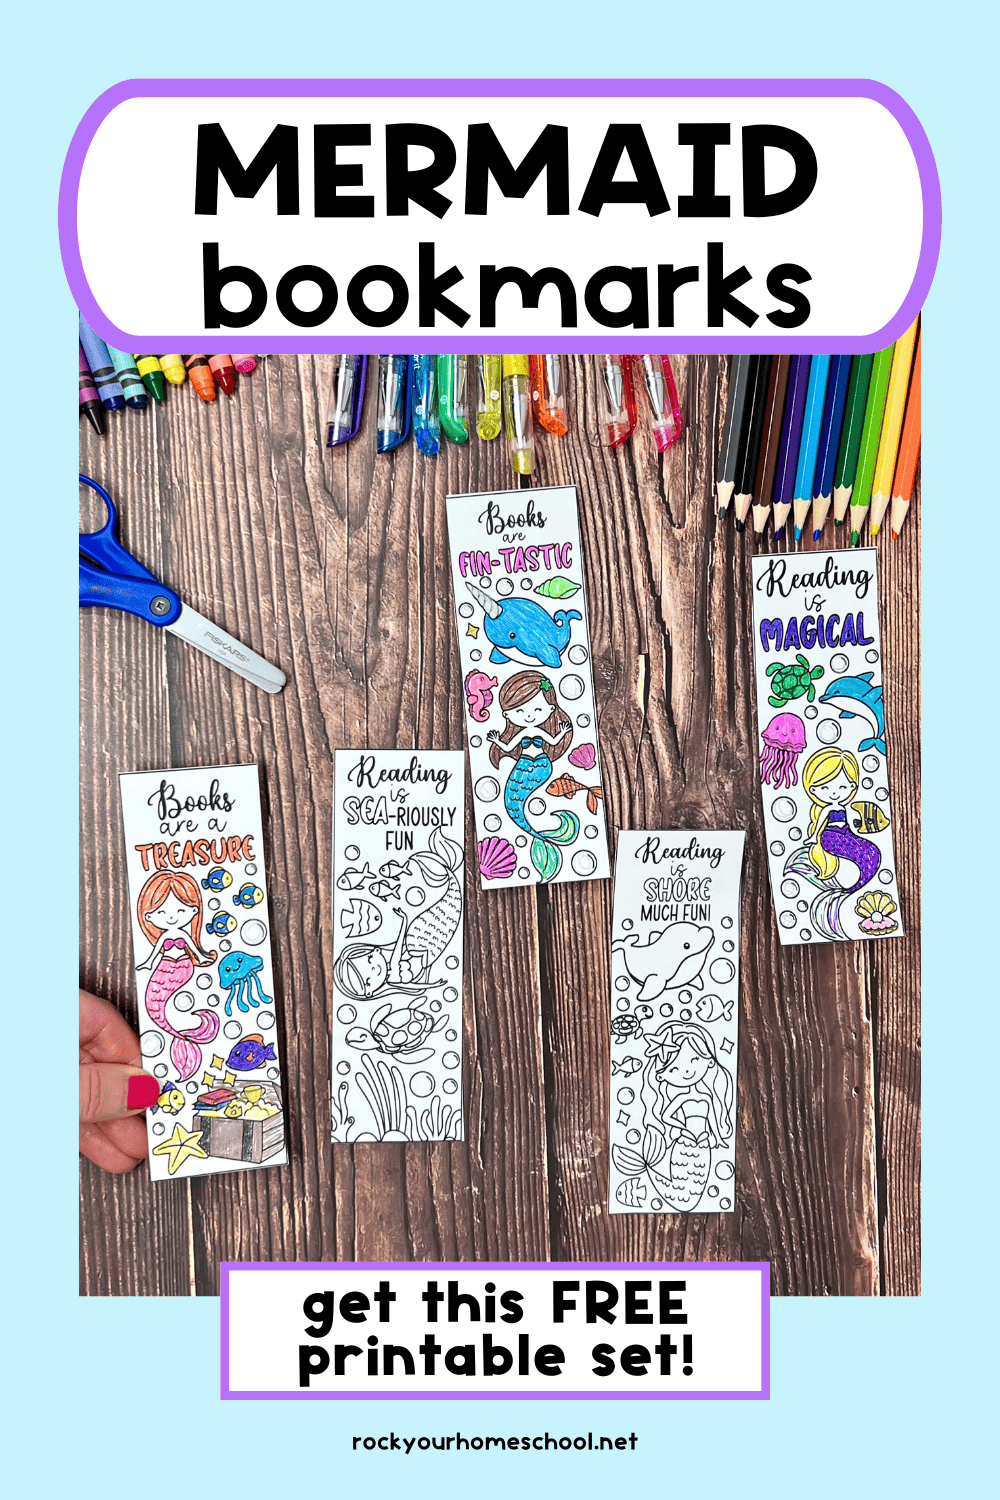 Woman holding examples of free printable mermaid bookmarks to color with glitter gel pens, color pencils, crayons, and scissors in the background.